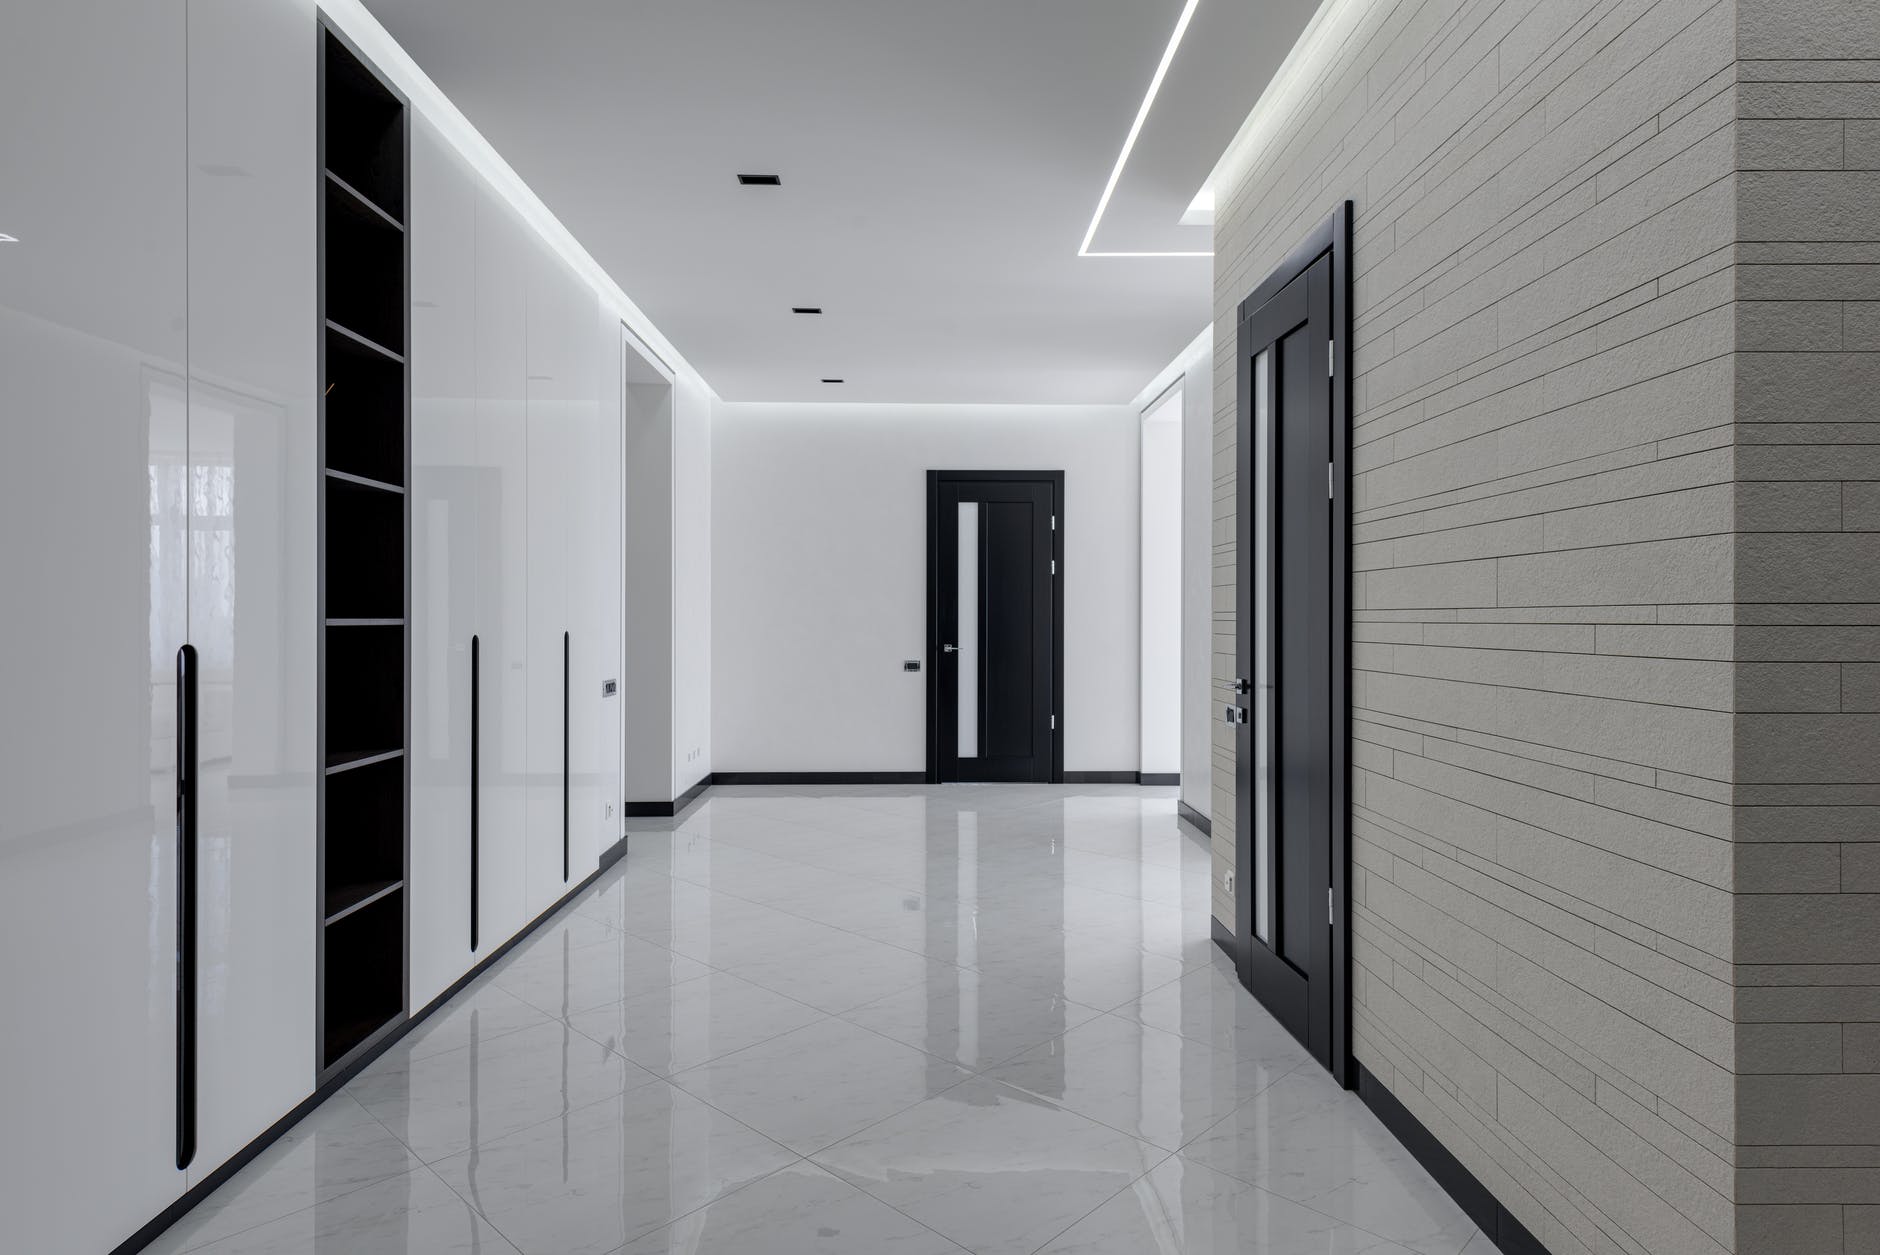 big hall in minimalistic style in modern apartment building